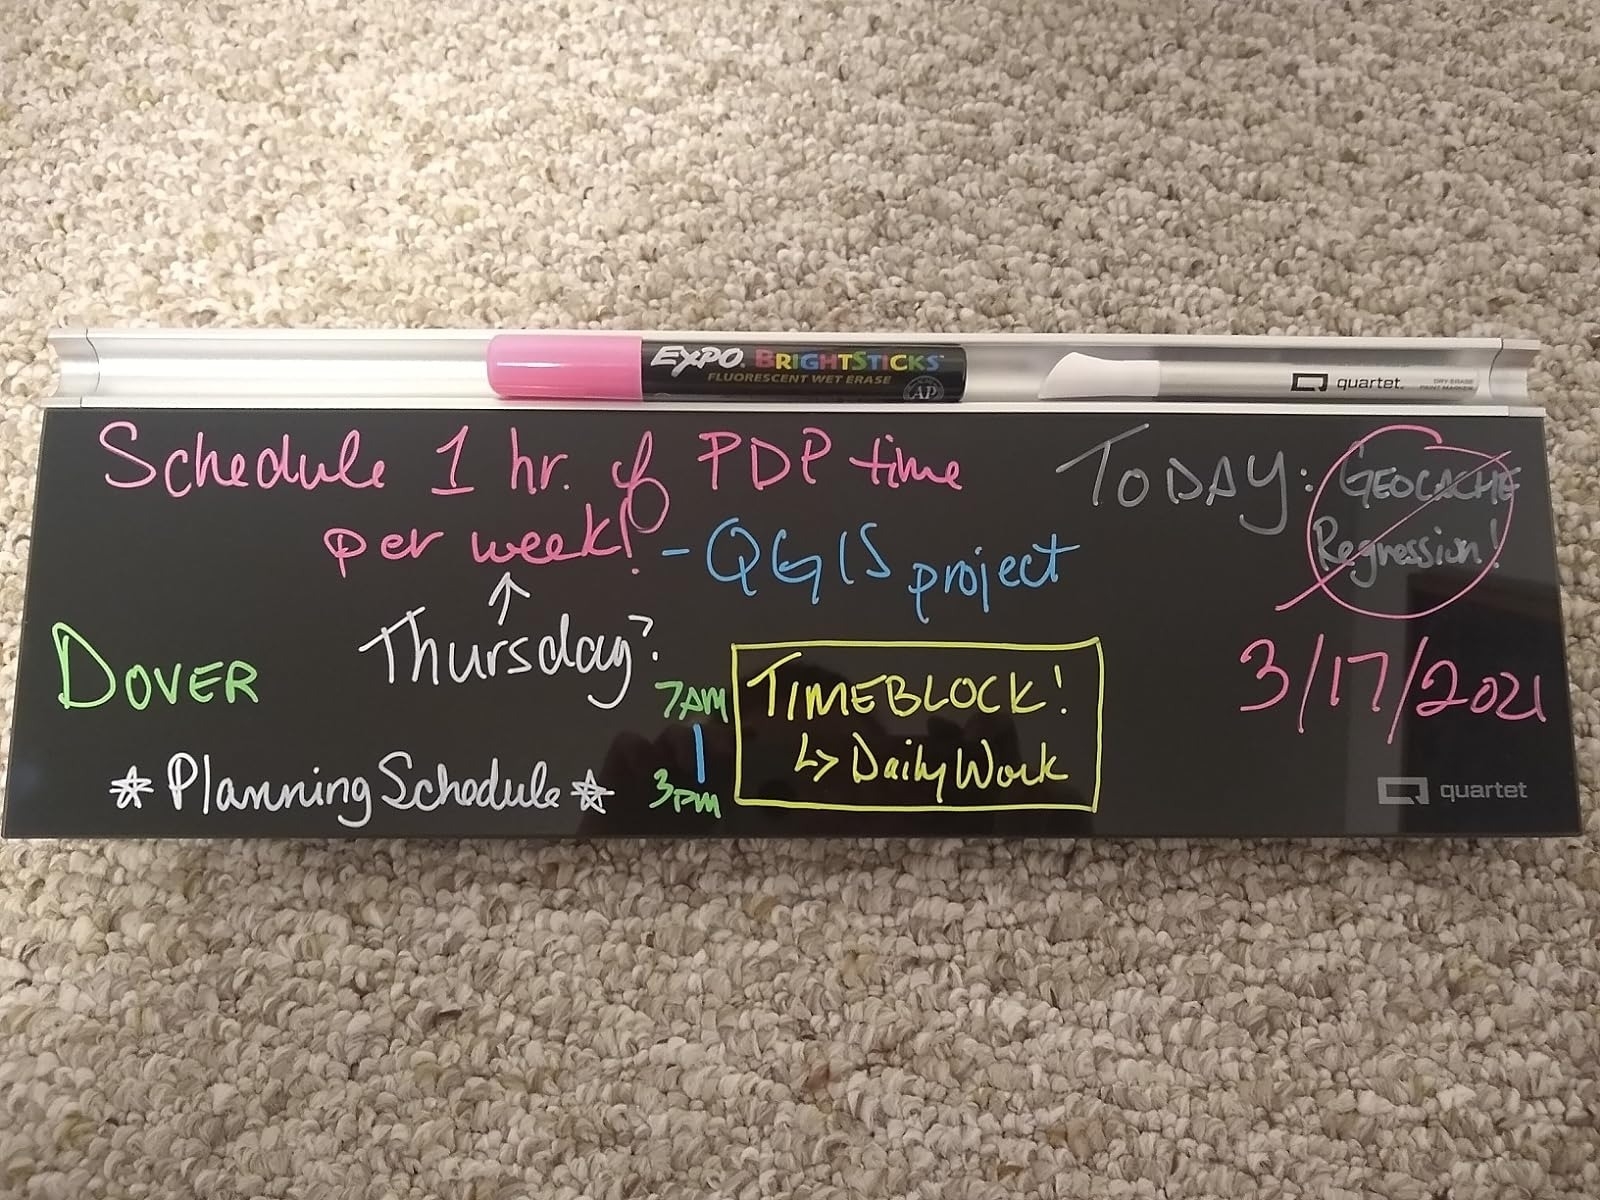 reviewer image of the black dry erase board with notes written in colorful markers